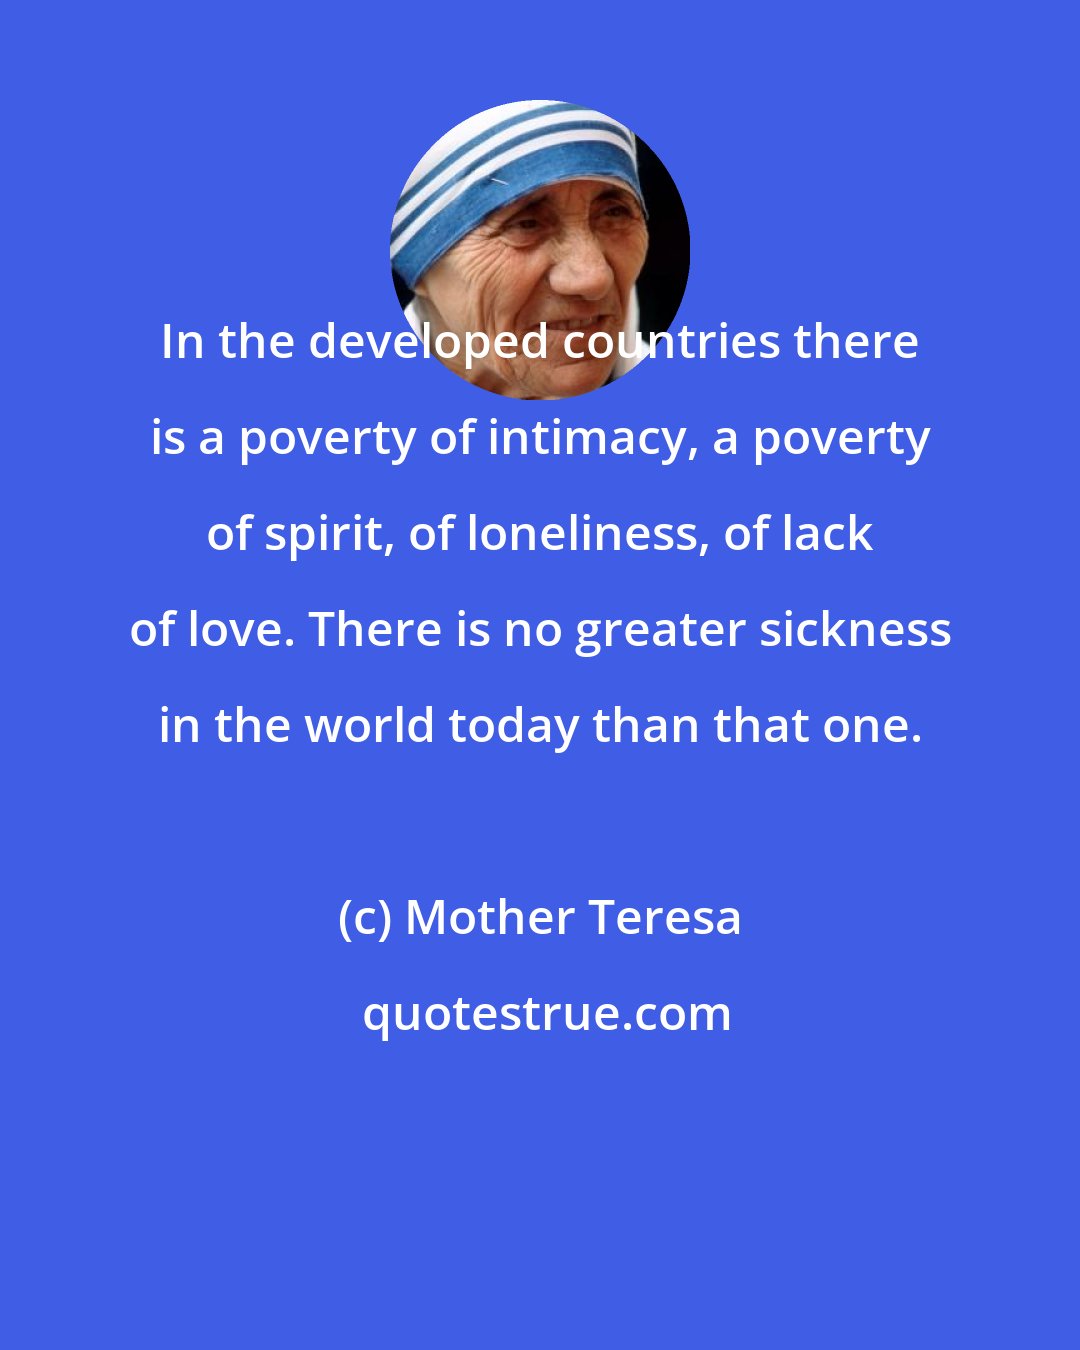 Mother Teresa: In the developed countries there is a poverty of intimacy, a poverty of spirit, of loneliness, of lack of love. There is no greater sickness in the world today than that one.